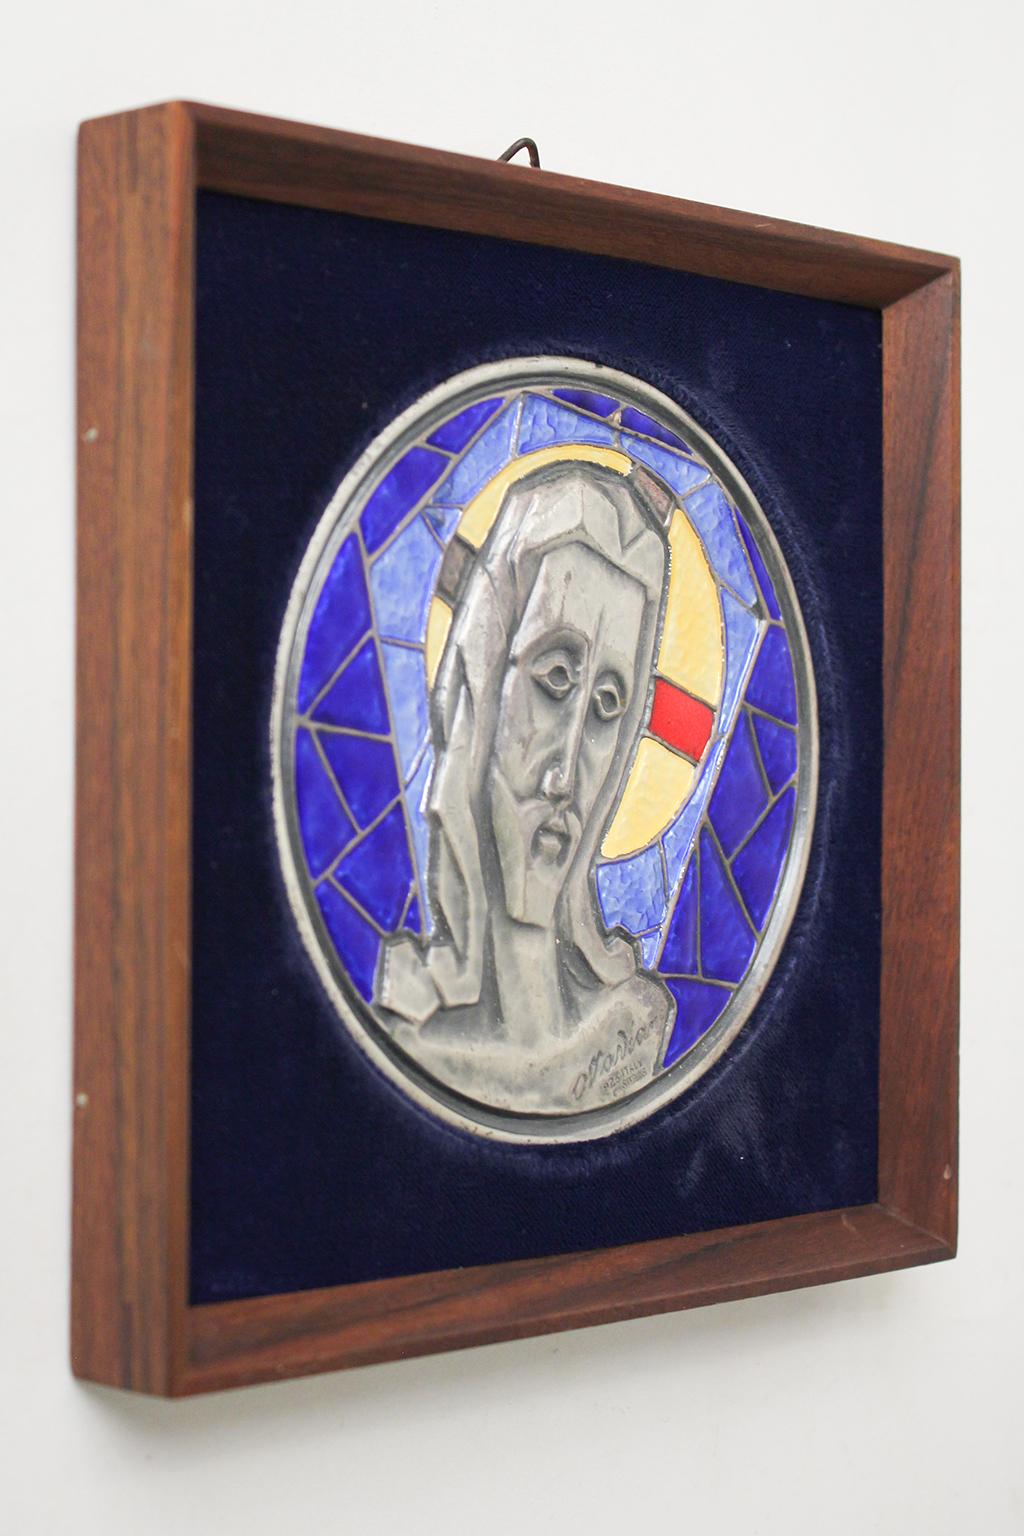 Beautiful modernist Italian sterling silver and enamel wall plaque done by Giovani Ottaviani and dates from the 1950s-1960s. Plaque is made of .925 sterling silver and has a great cubist enamel design of Jesus. The enamel design was made to look